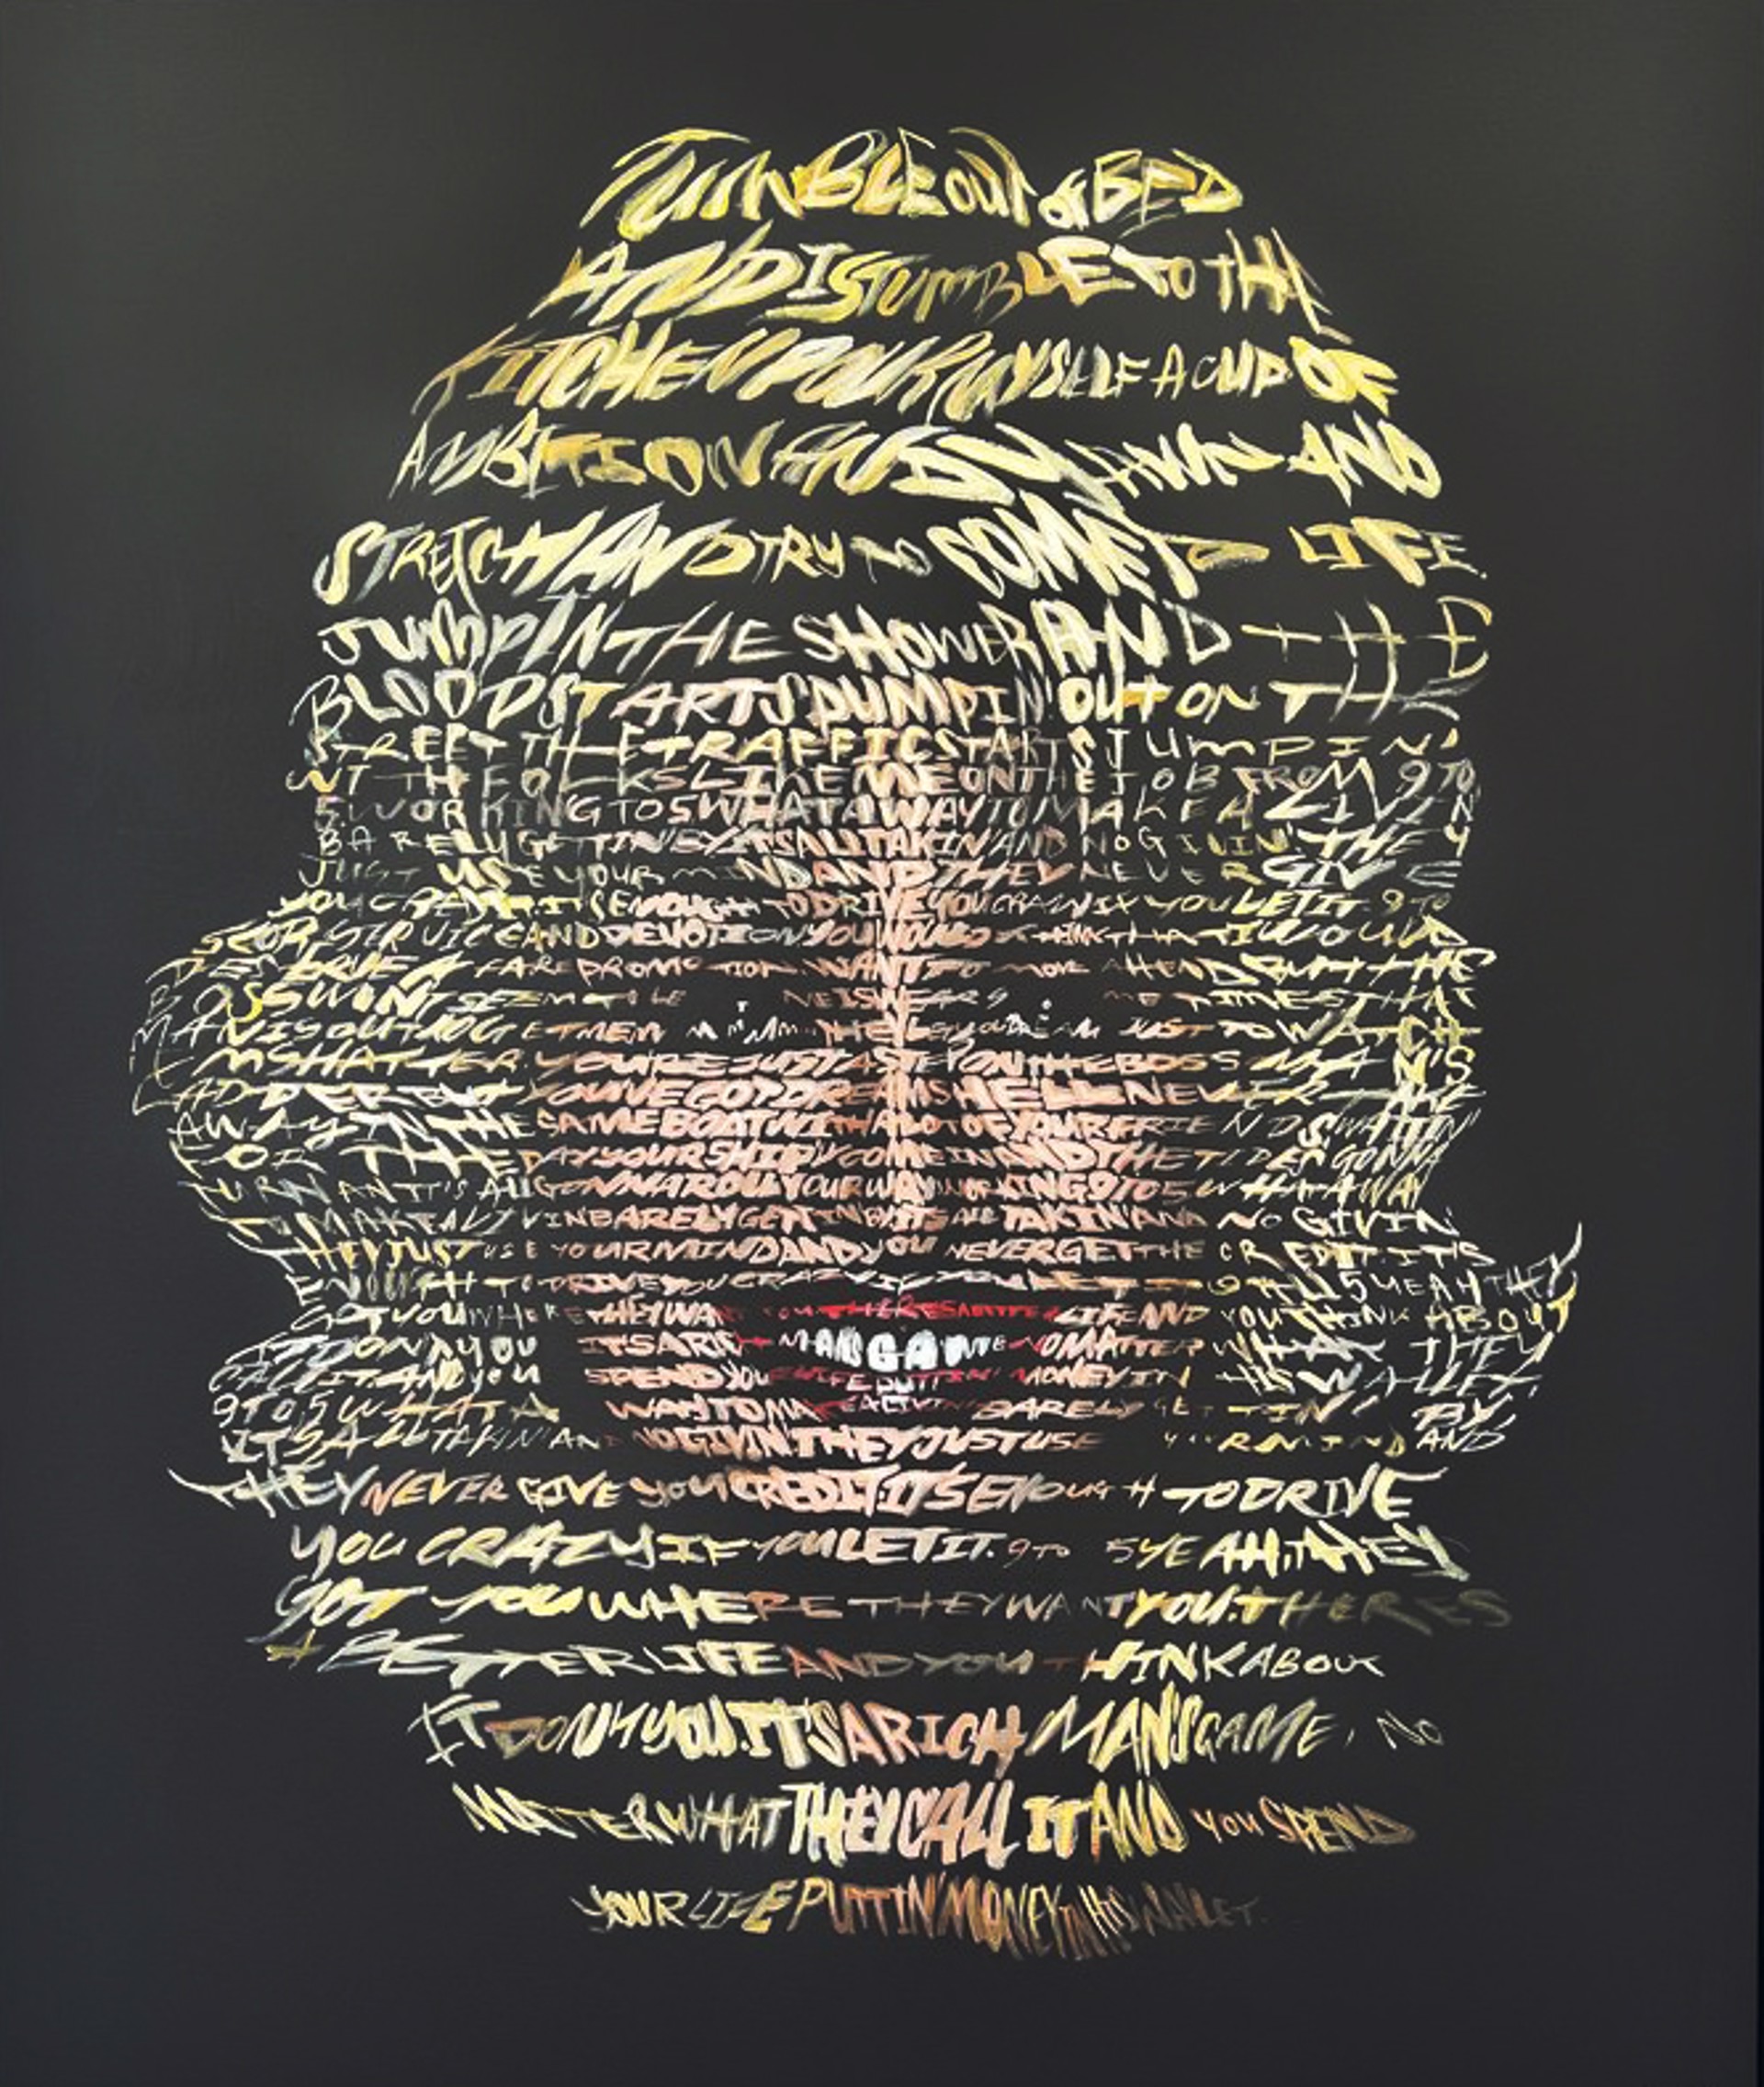 Dolly Parton (Text: 9 to 5) by David Hollier